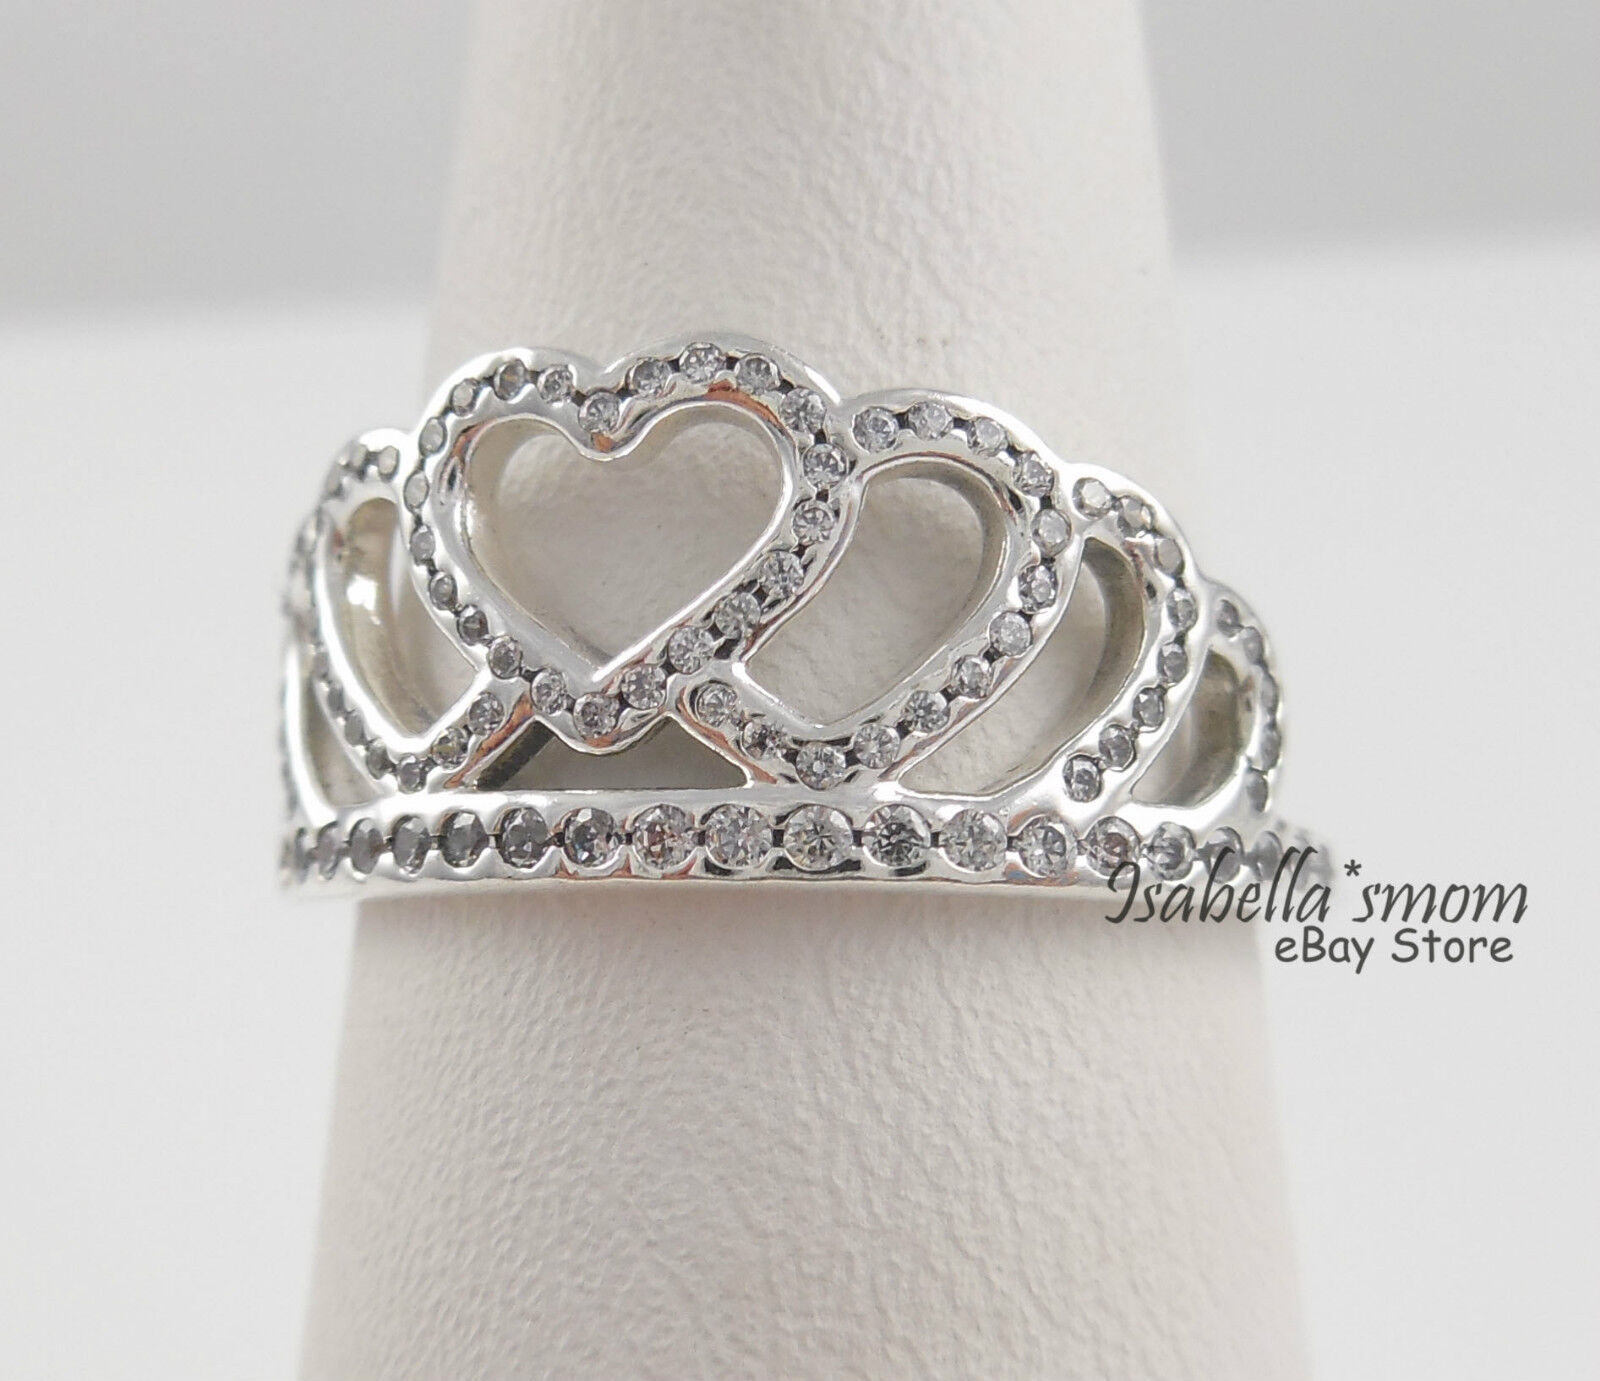 HEARTS TIARA Authentic PANDORA Silver CROWN Ring 7.5/56 190958CZ NEW w POUCH